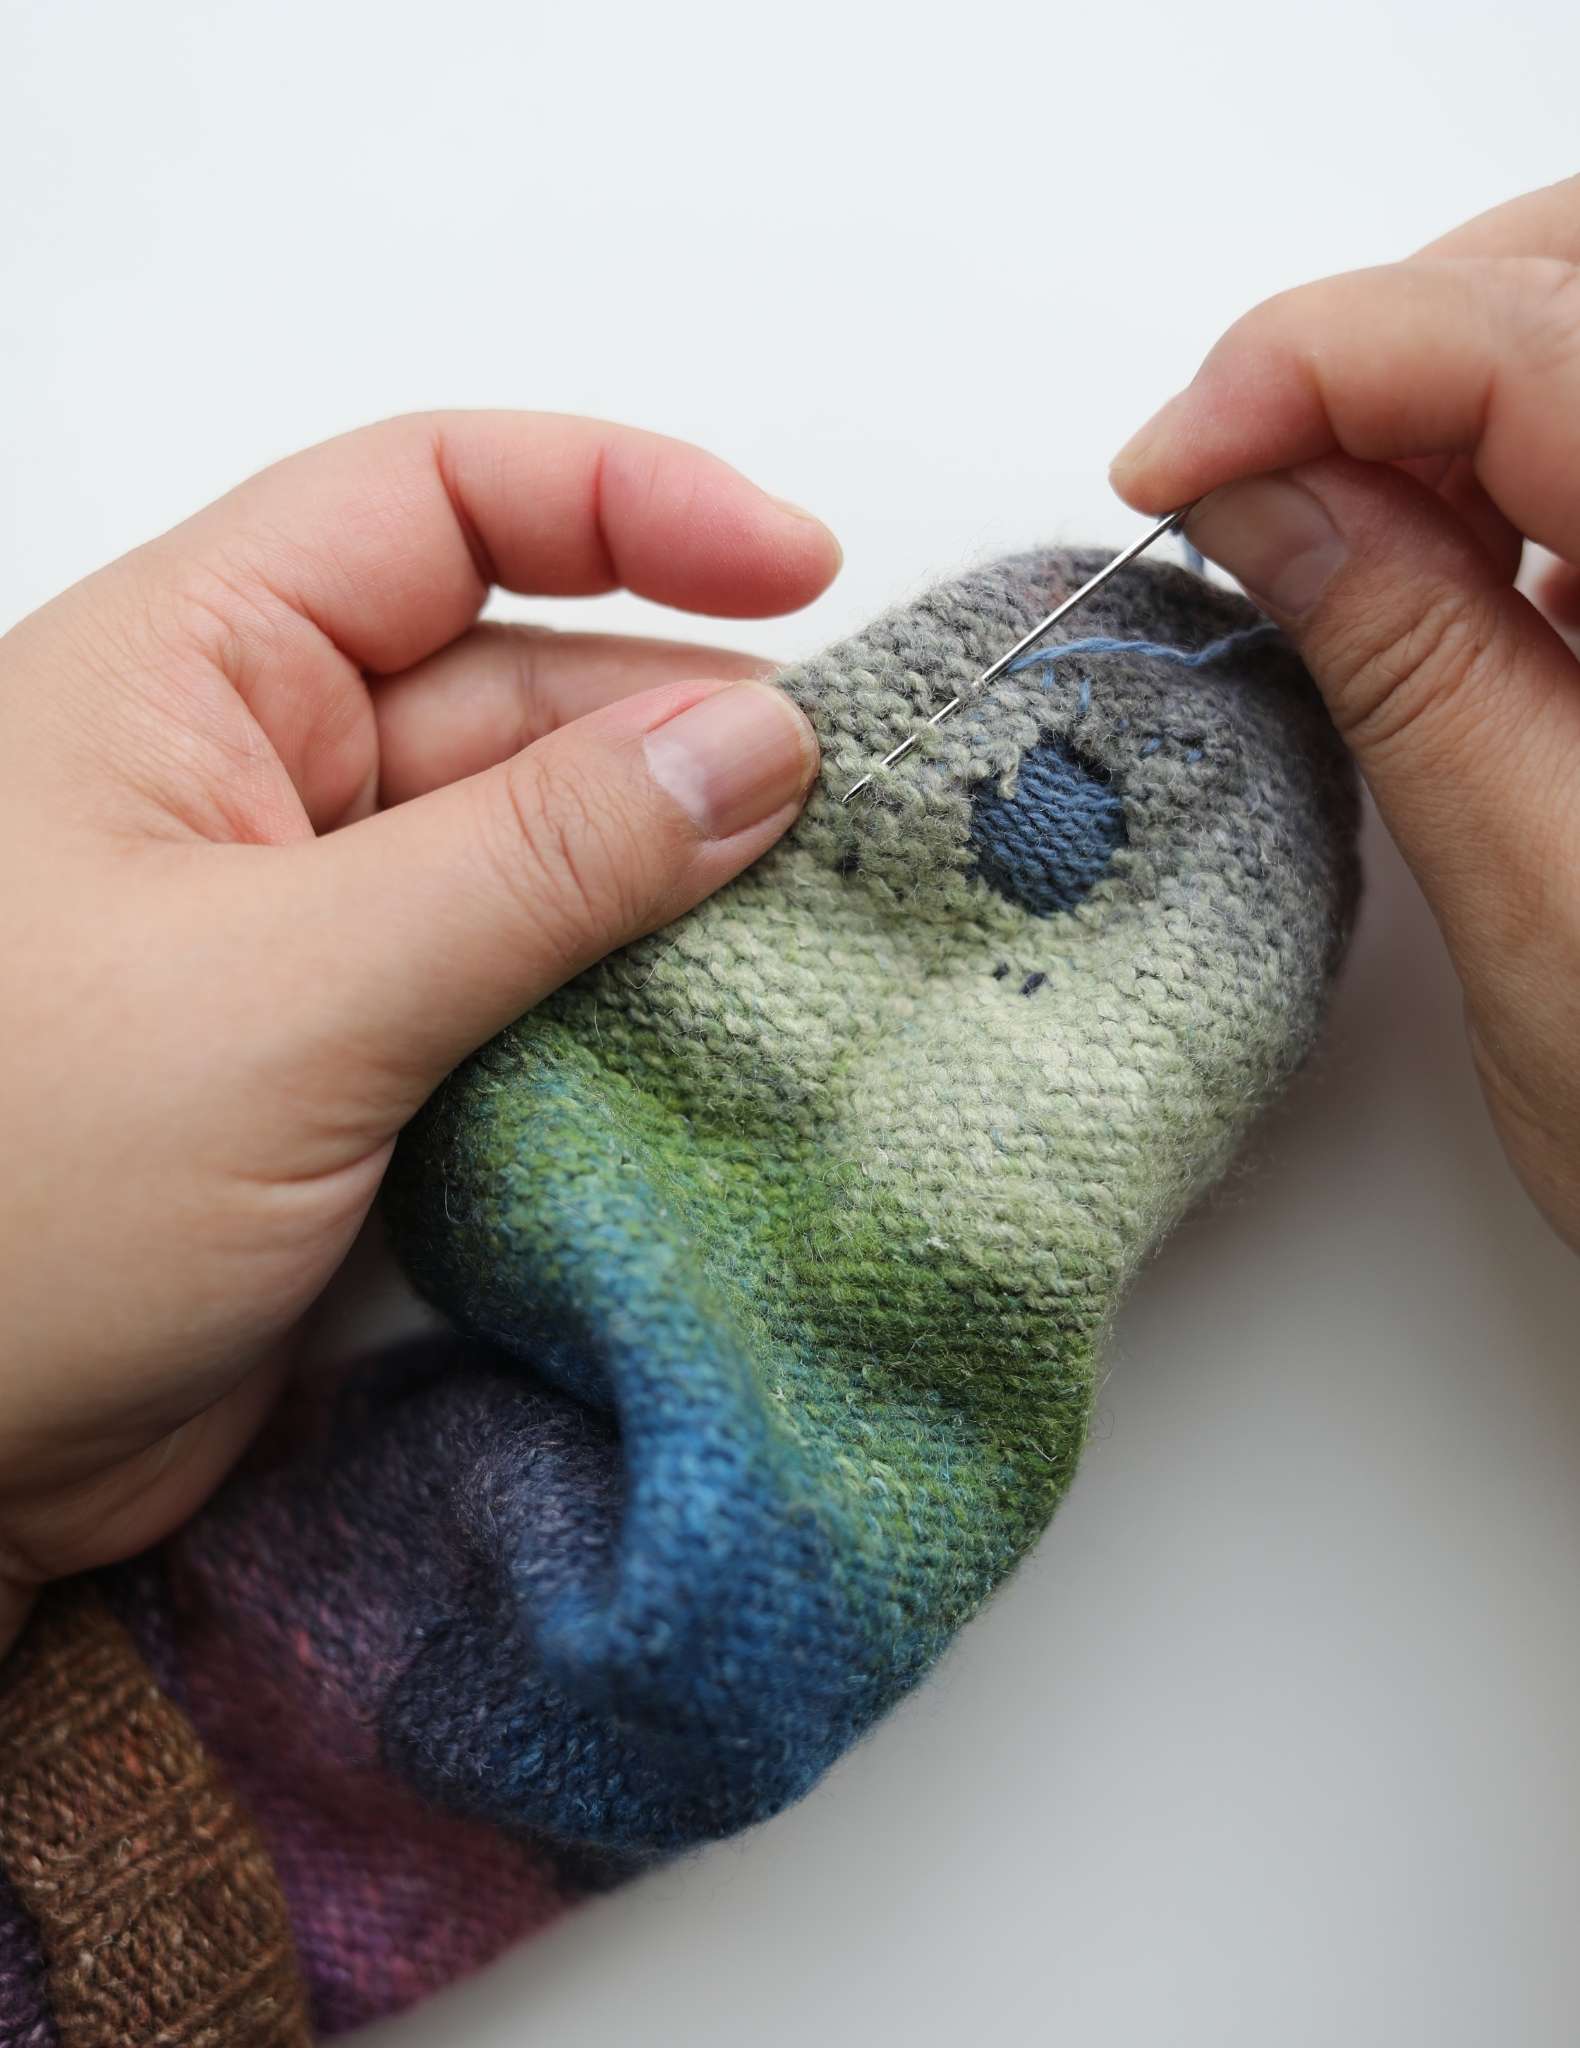 The darned sock is show from the inside, and the loose threads are being tightened and sewn down.